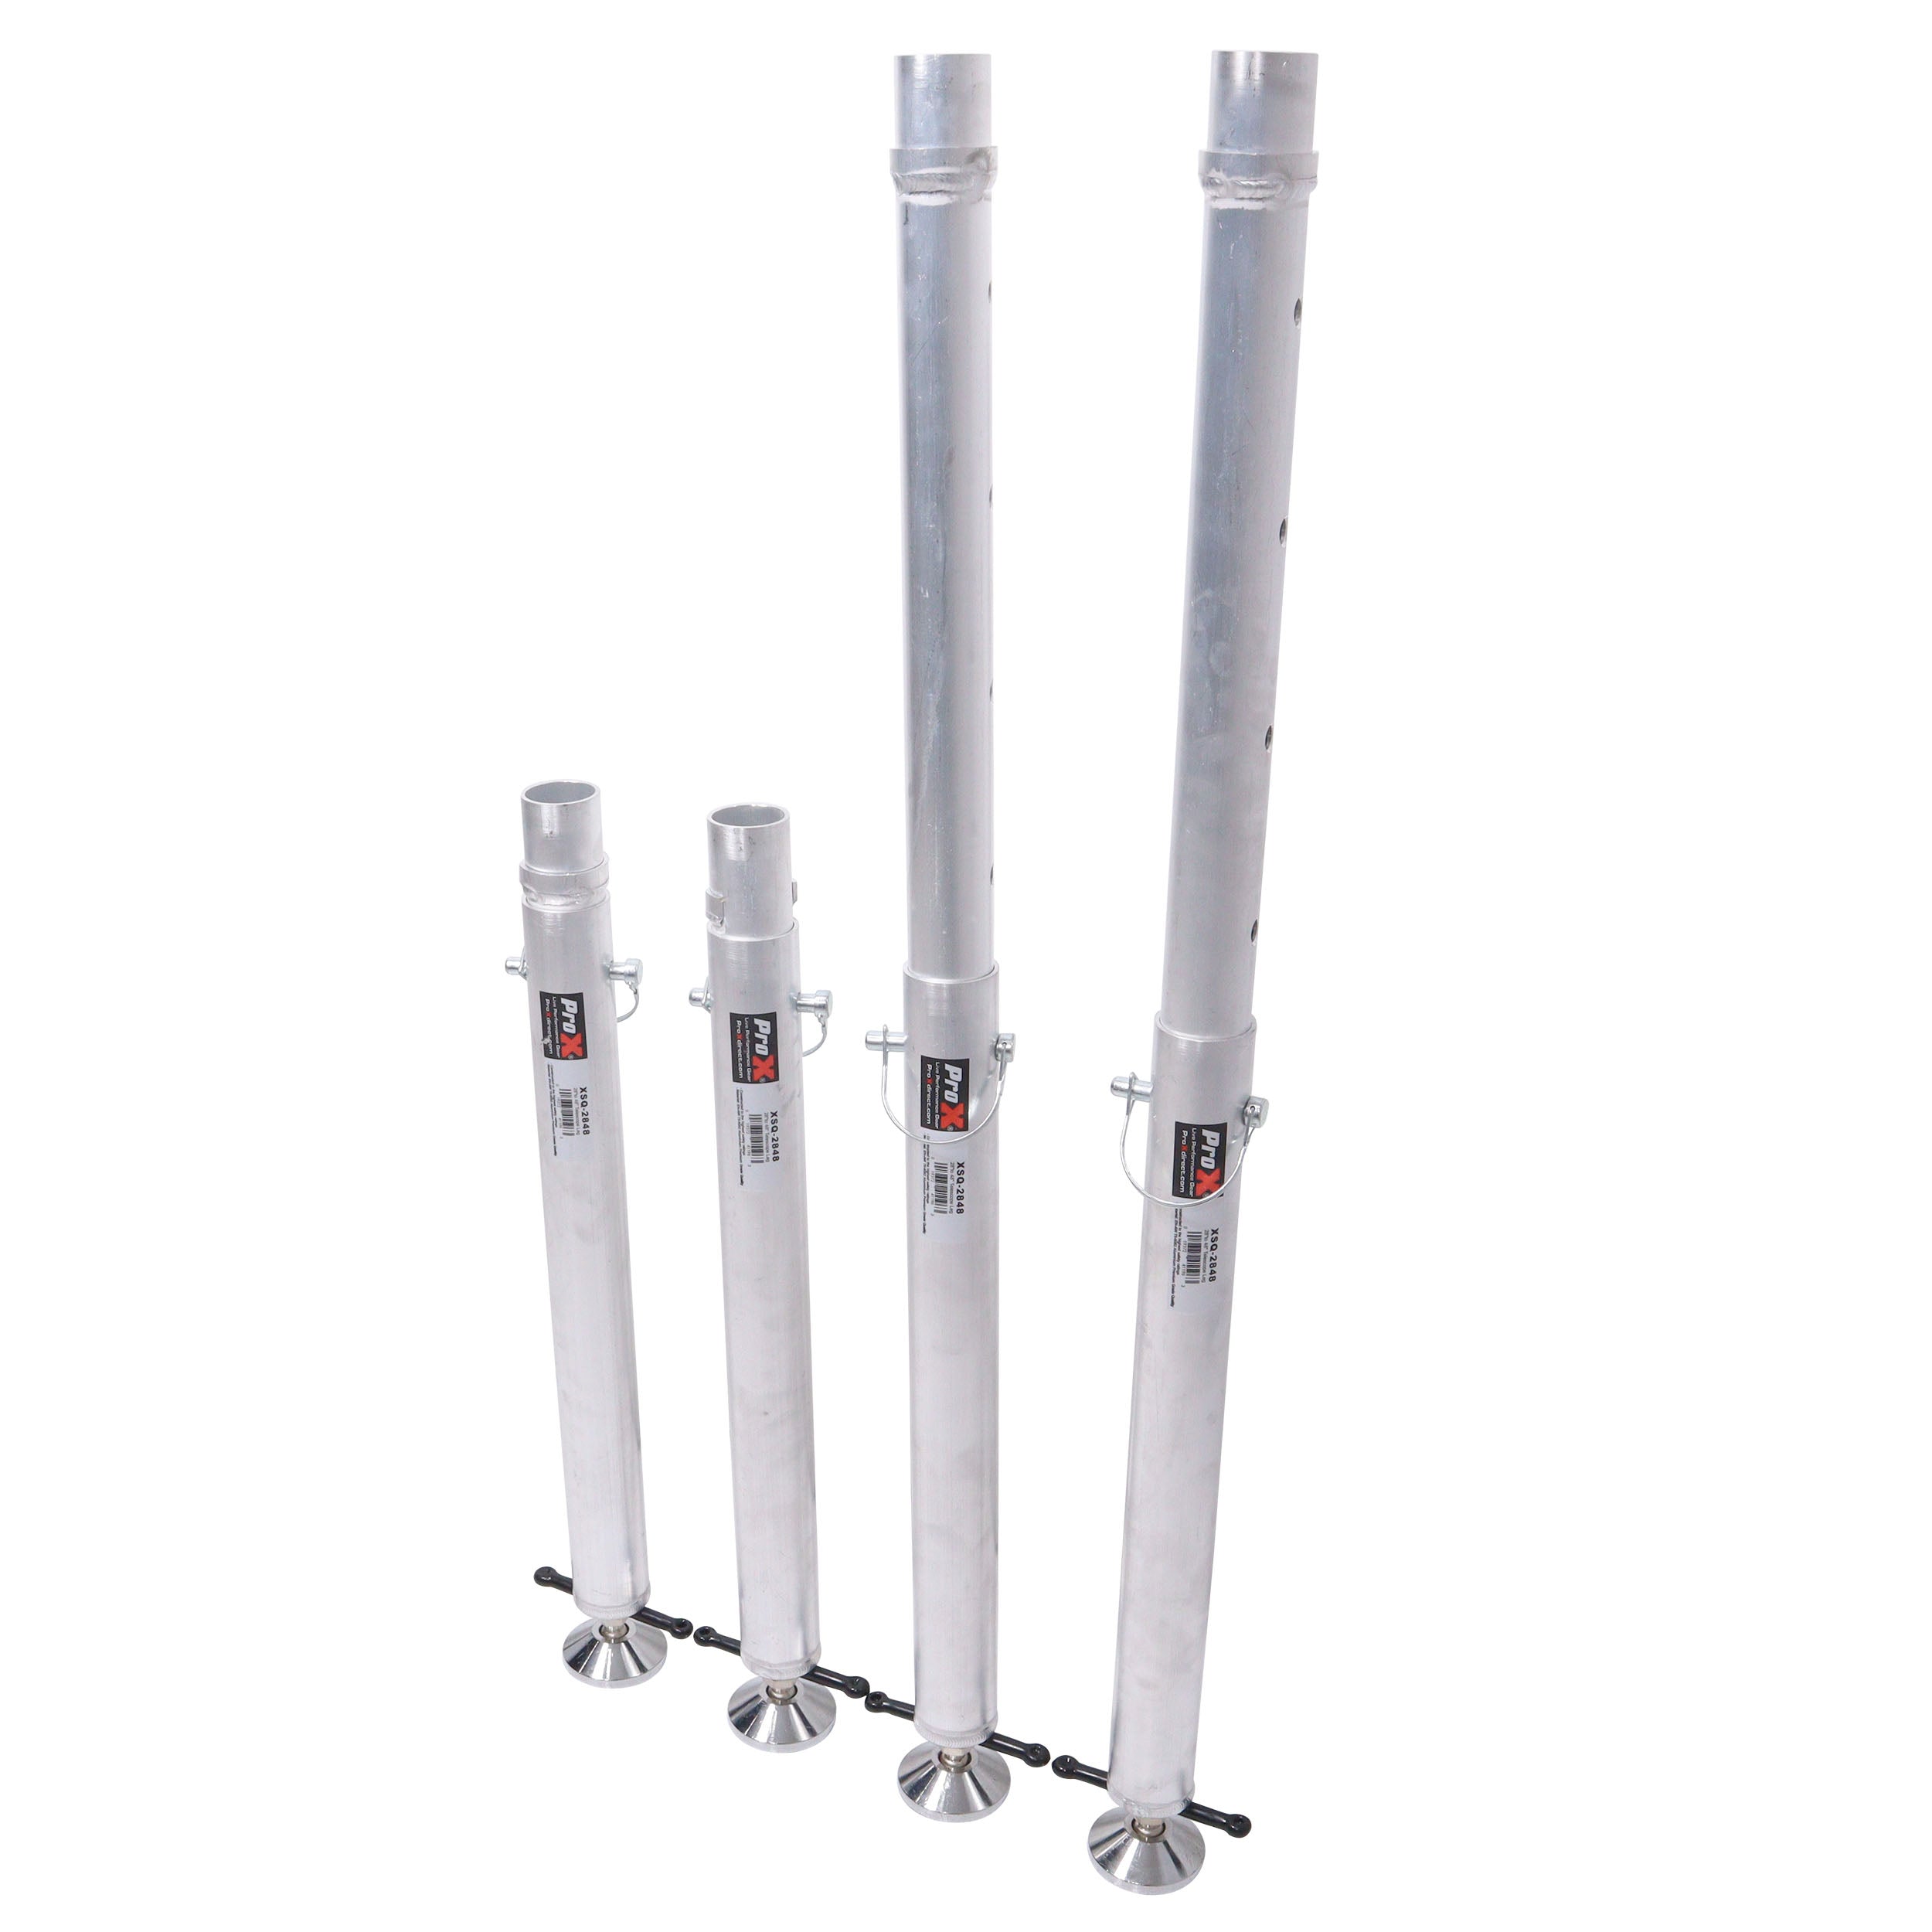 Pro X Set of Four StageQ Platform Telescoping Legs 28 to 48 inch Height Adjustable Legs Only